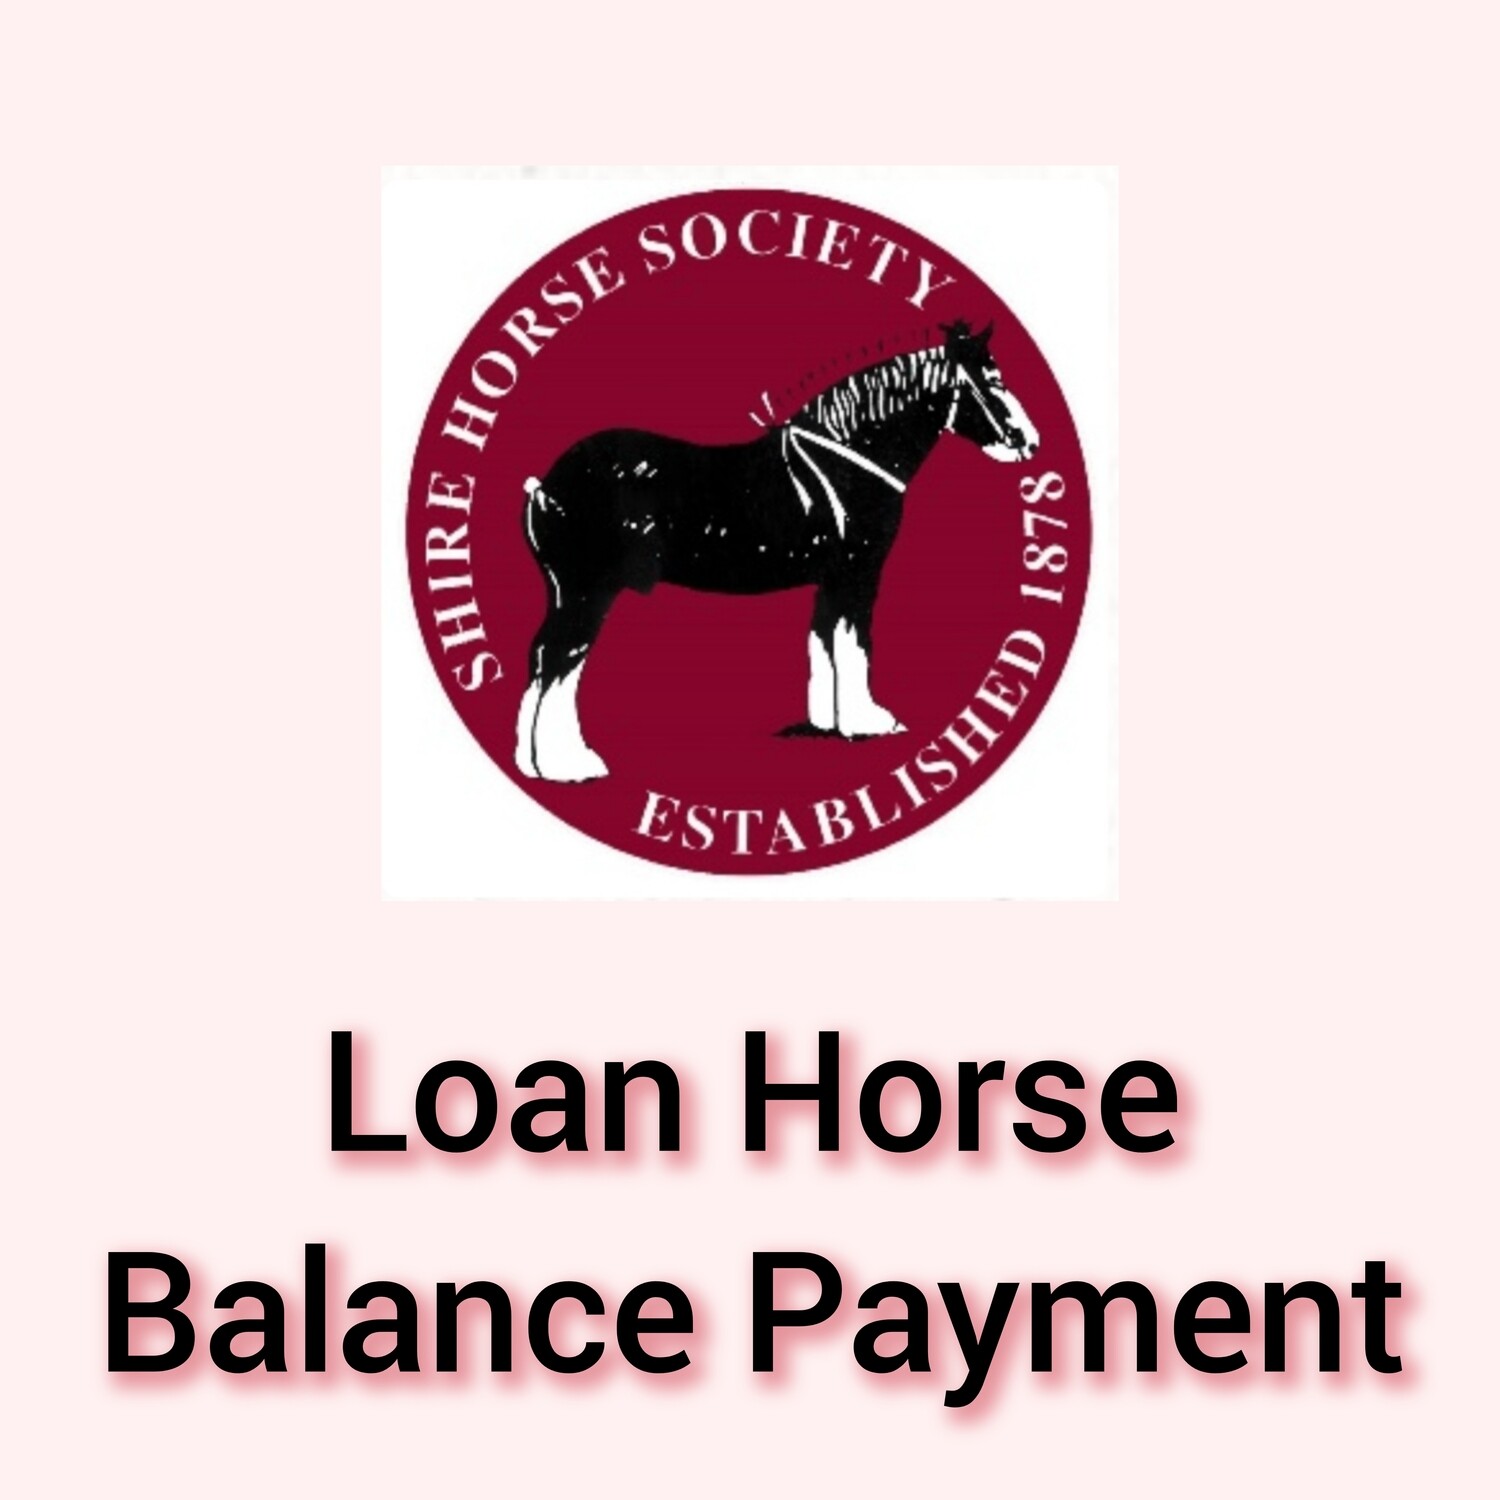 3. Heavy Horse Camp Loan Horse Balance Payment